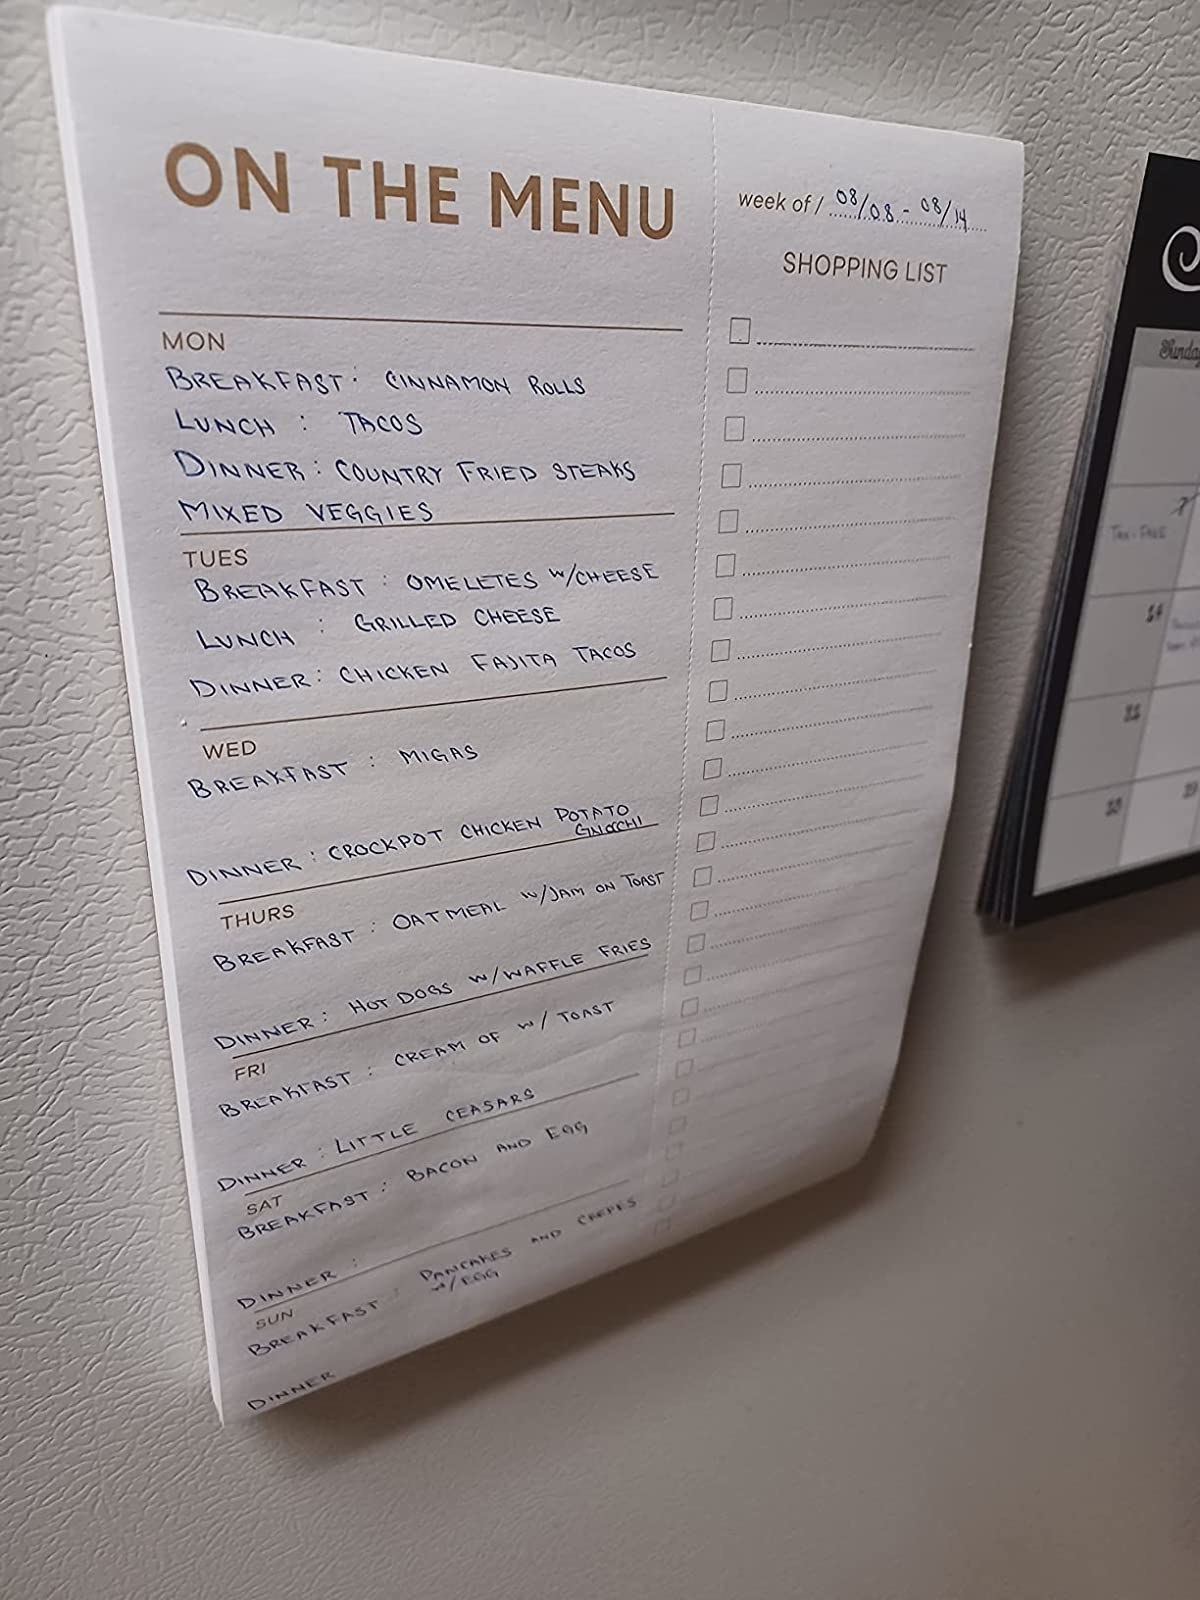 Reviewer image of filled in meal planner on the fridge